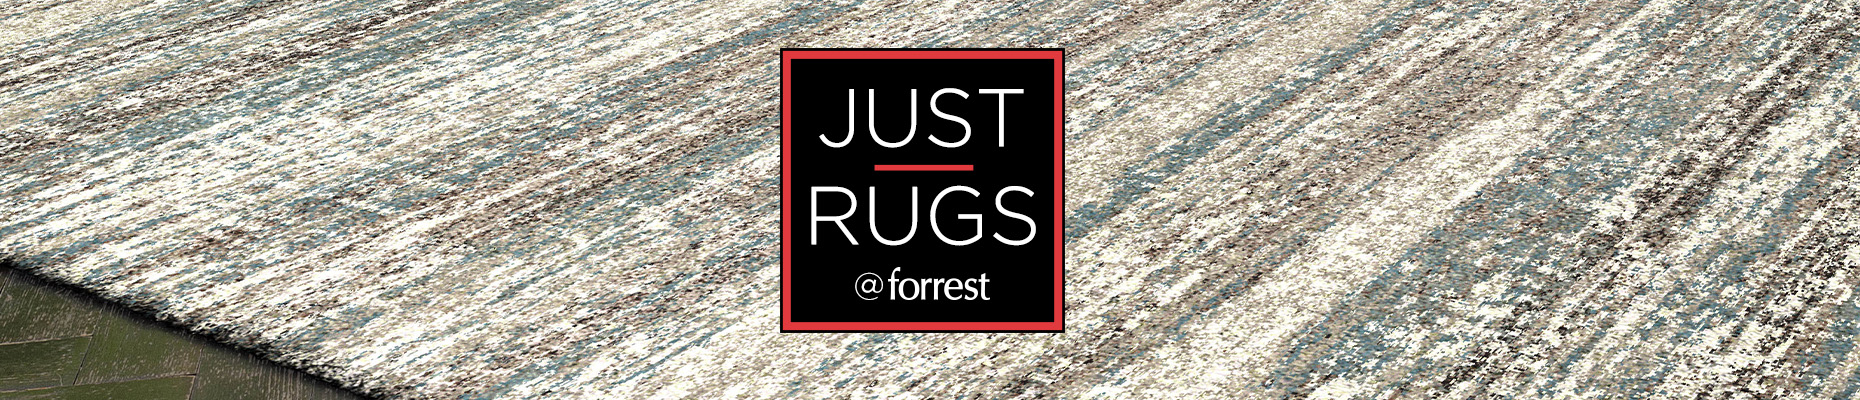 Just-Rugs Forrest Furnishing